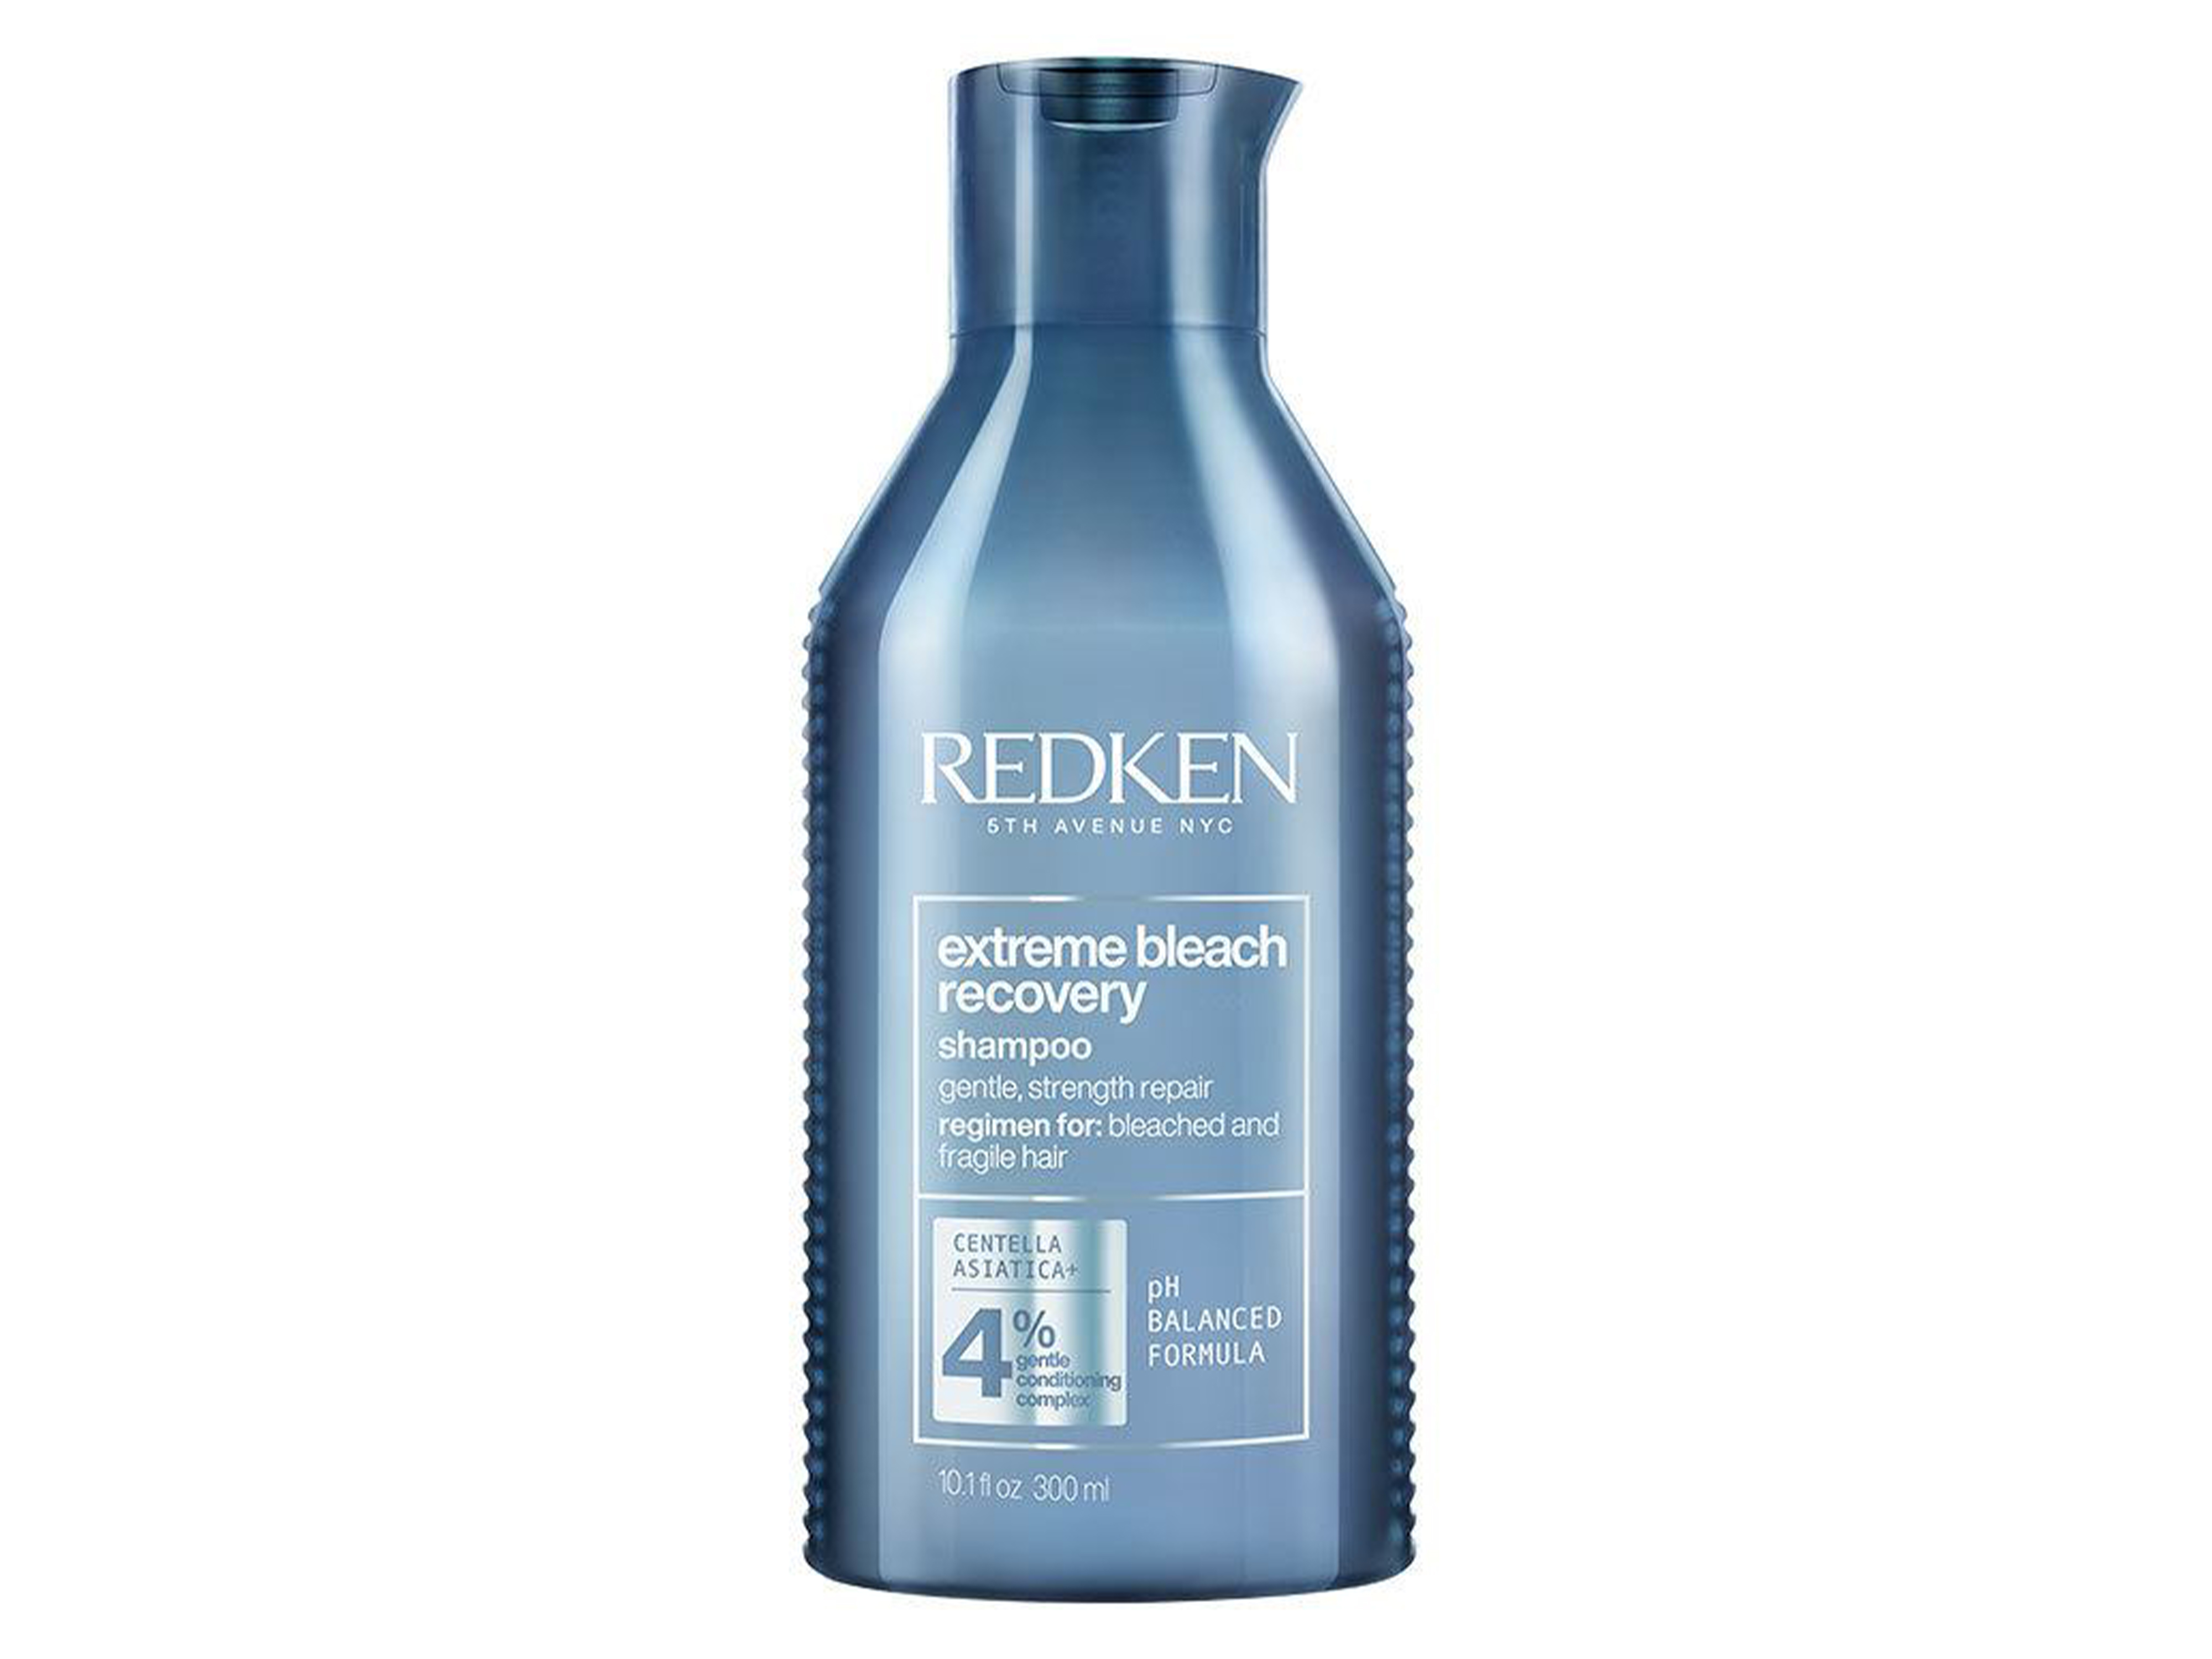 Redken Extreme Bleach Recovery Shampoo, 300 ml